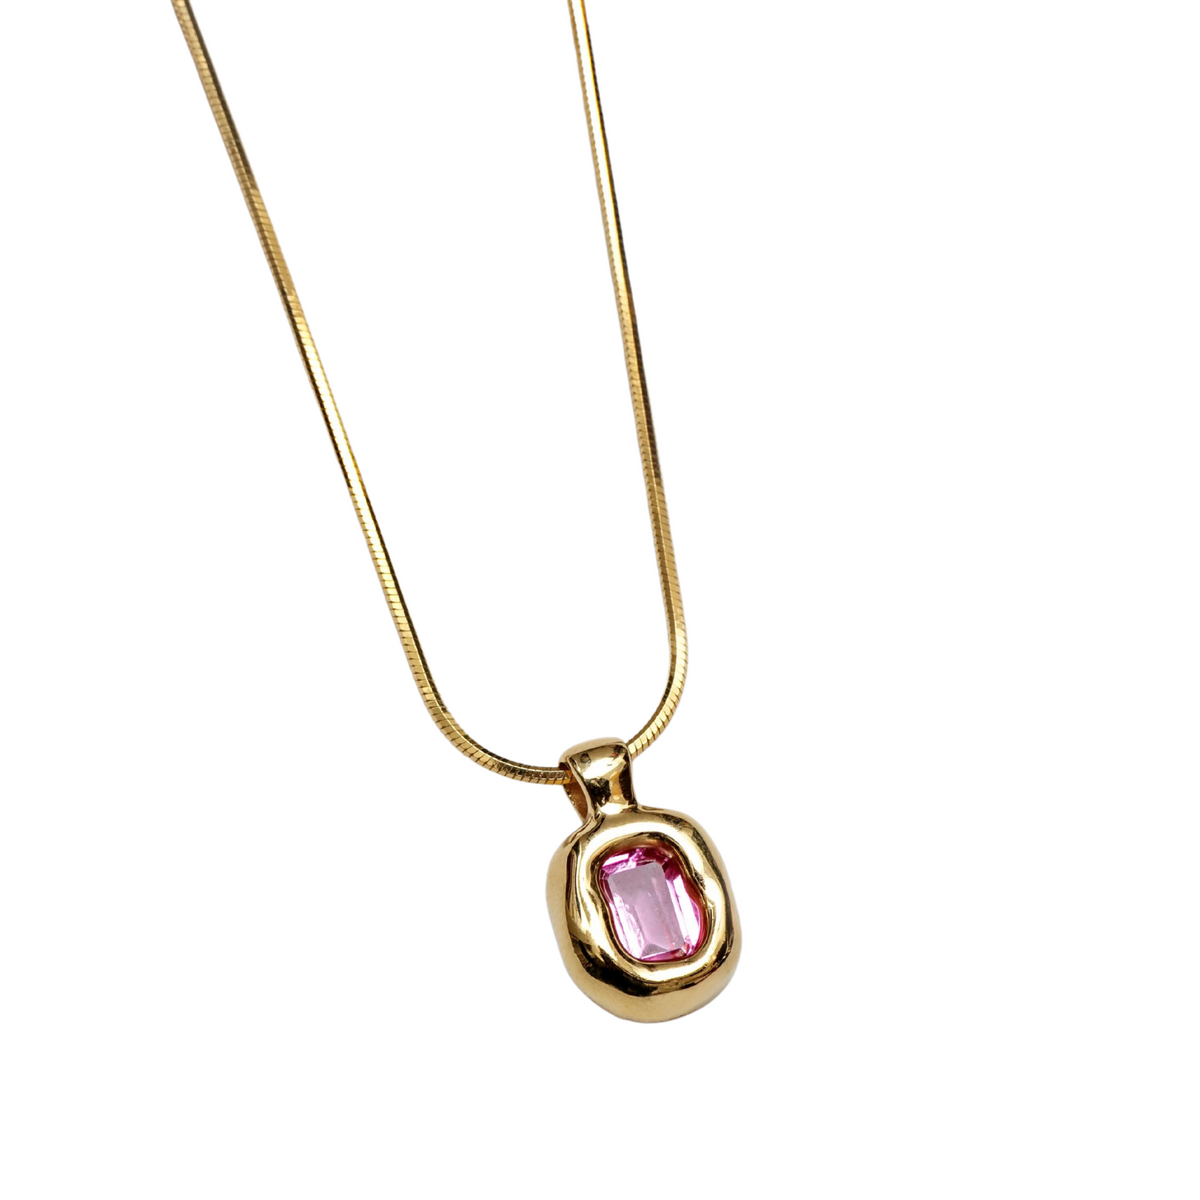 FREYA NECKLACE - PINK AND GOLD